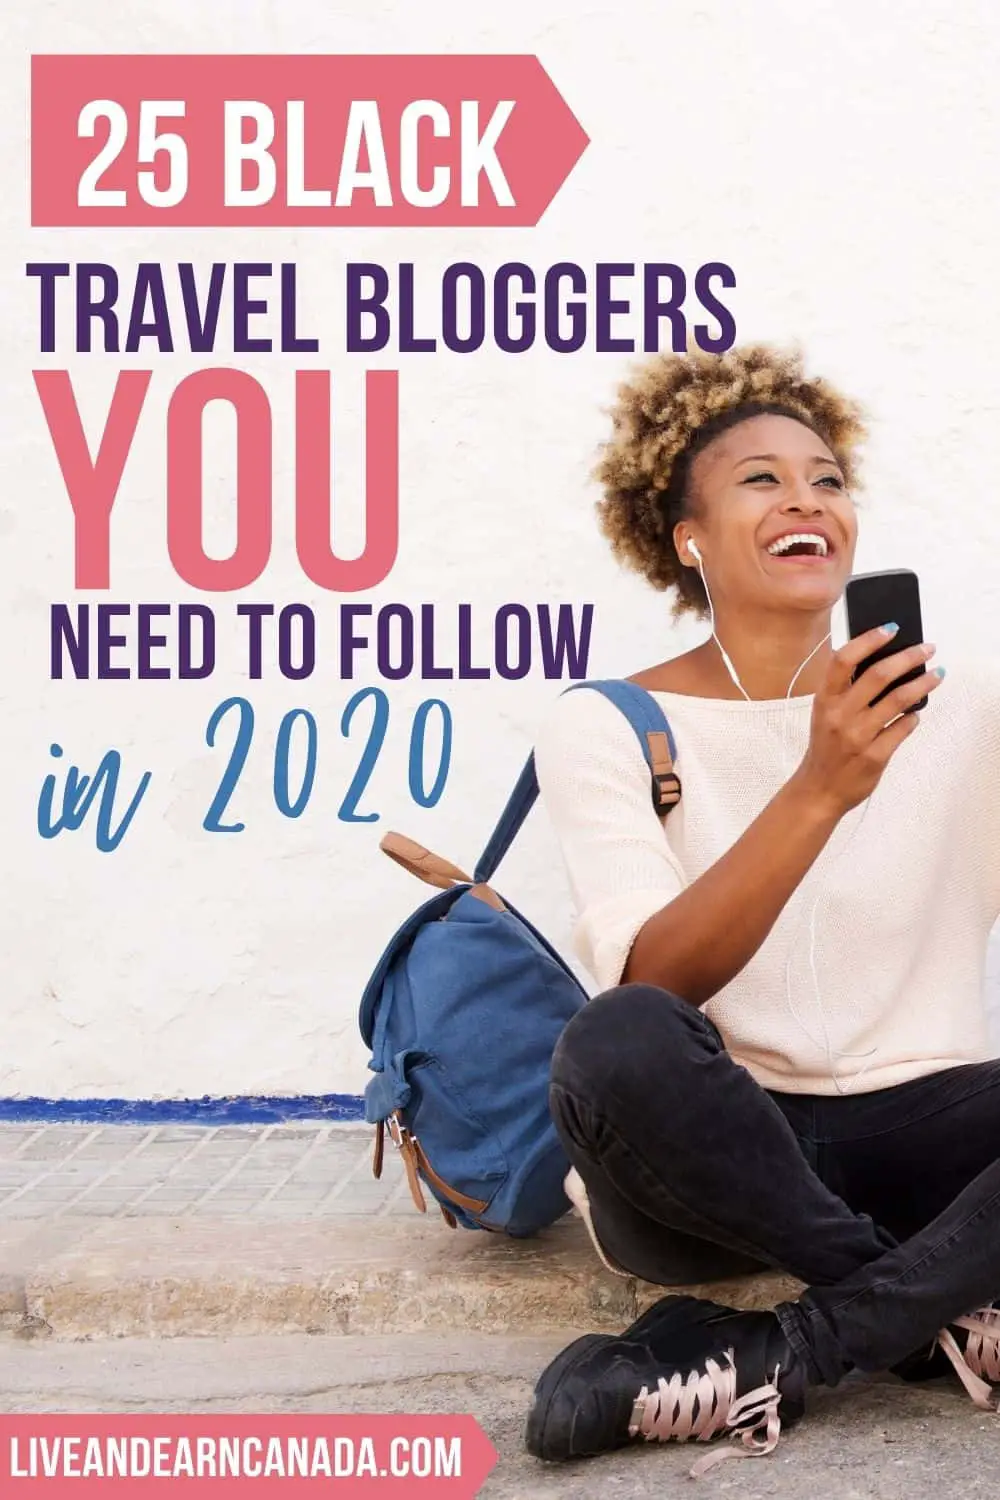 Not where all the black people in the travel industry are? We made list of over 25 black travel bloggers to follow this year! If you are looking for black female travelers to follow, check out our list #blacktravelbloggers #blackfemaletravels #blackwomen